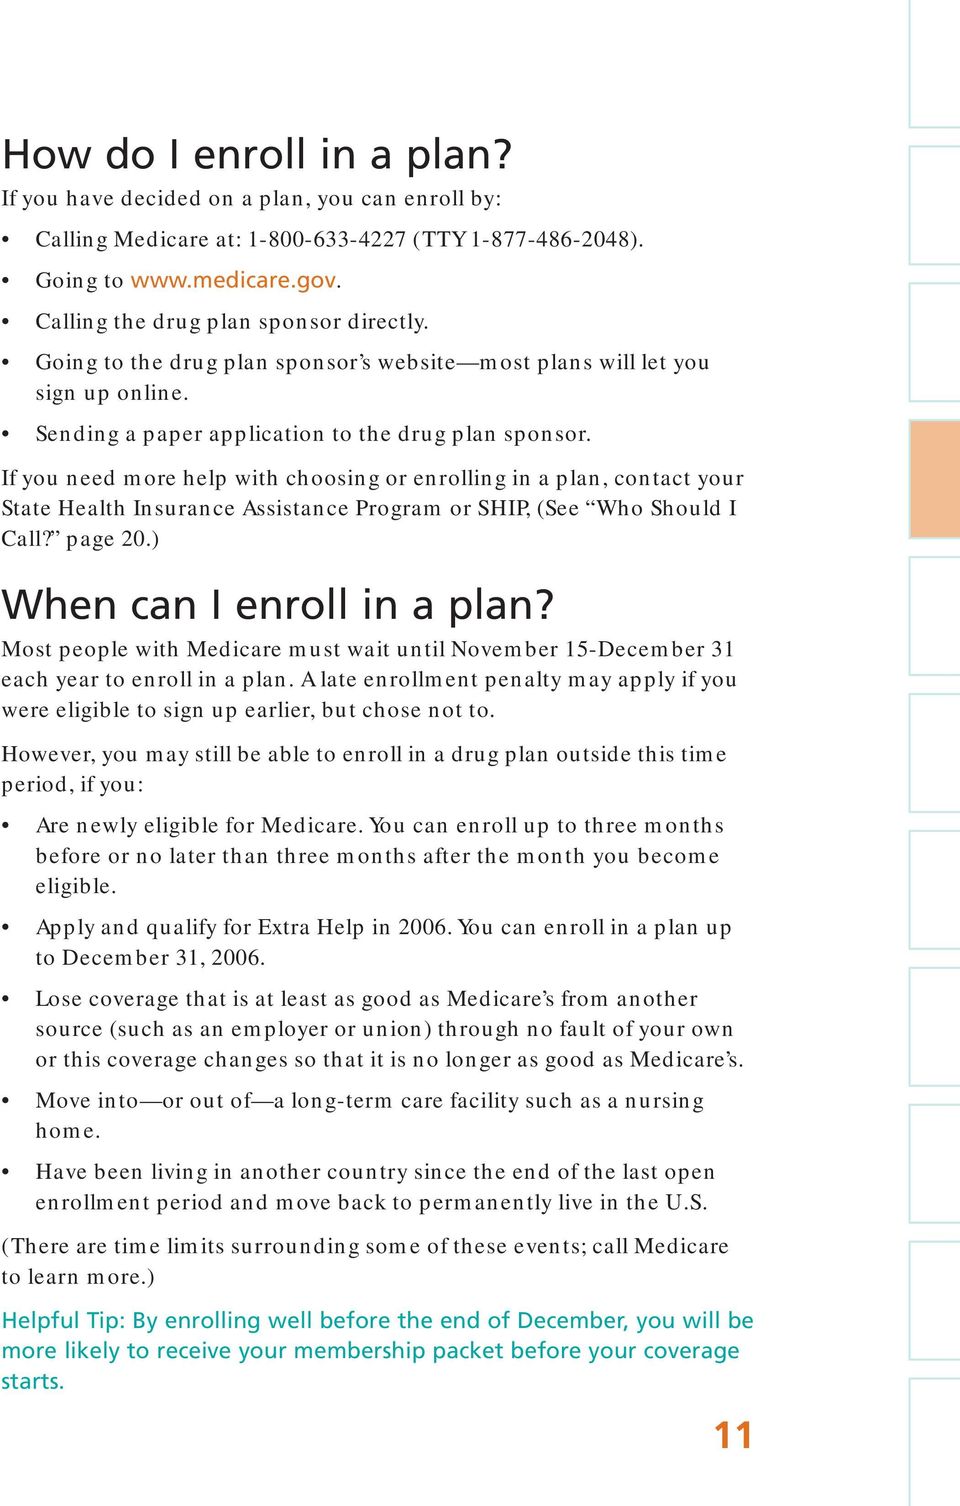 If you need more help with choosing or enrolling in a plan, contact your State Health Insurance Assistance Program or SHIP, (See Who Should I Call? page 20.) When can I enroll in a plan?